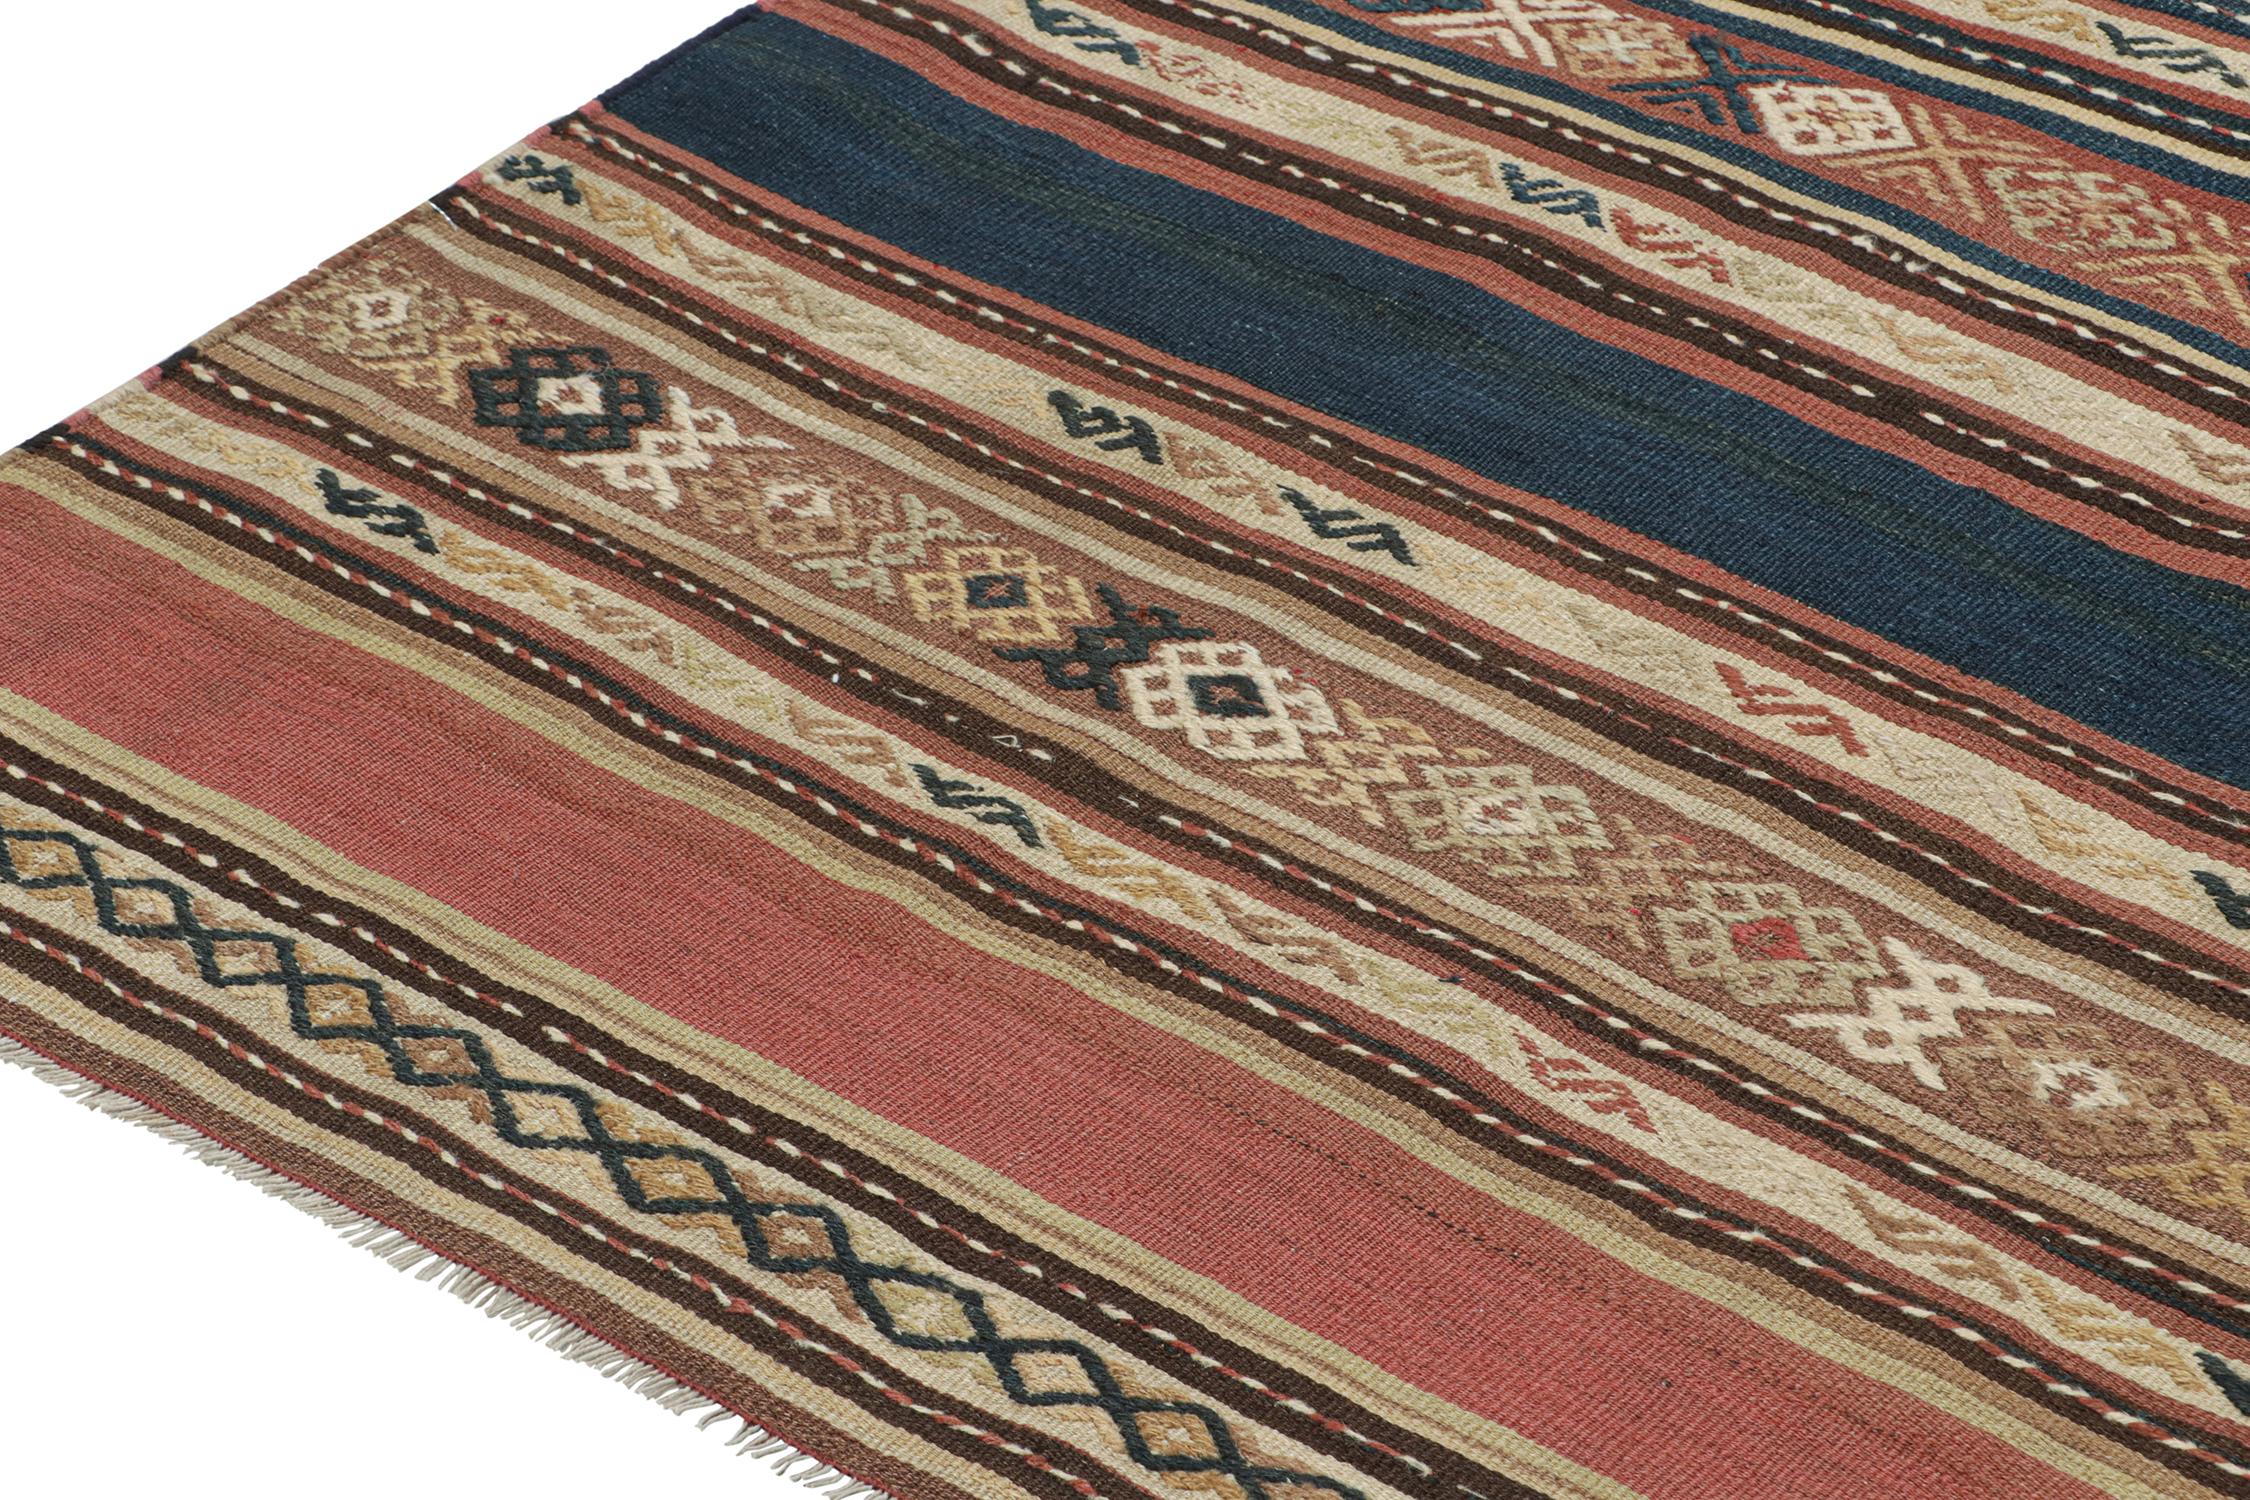 Vintage Shahsavan Persian Kilim with Geometric Patterns by Rug & Kilim In Good Condition For Sale In Long Island City, NY